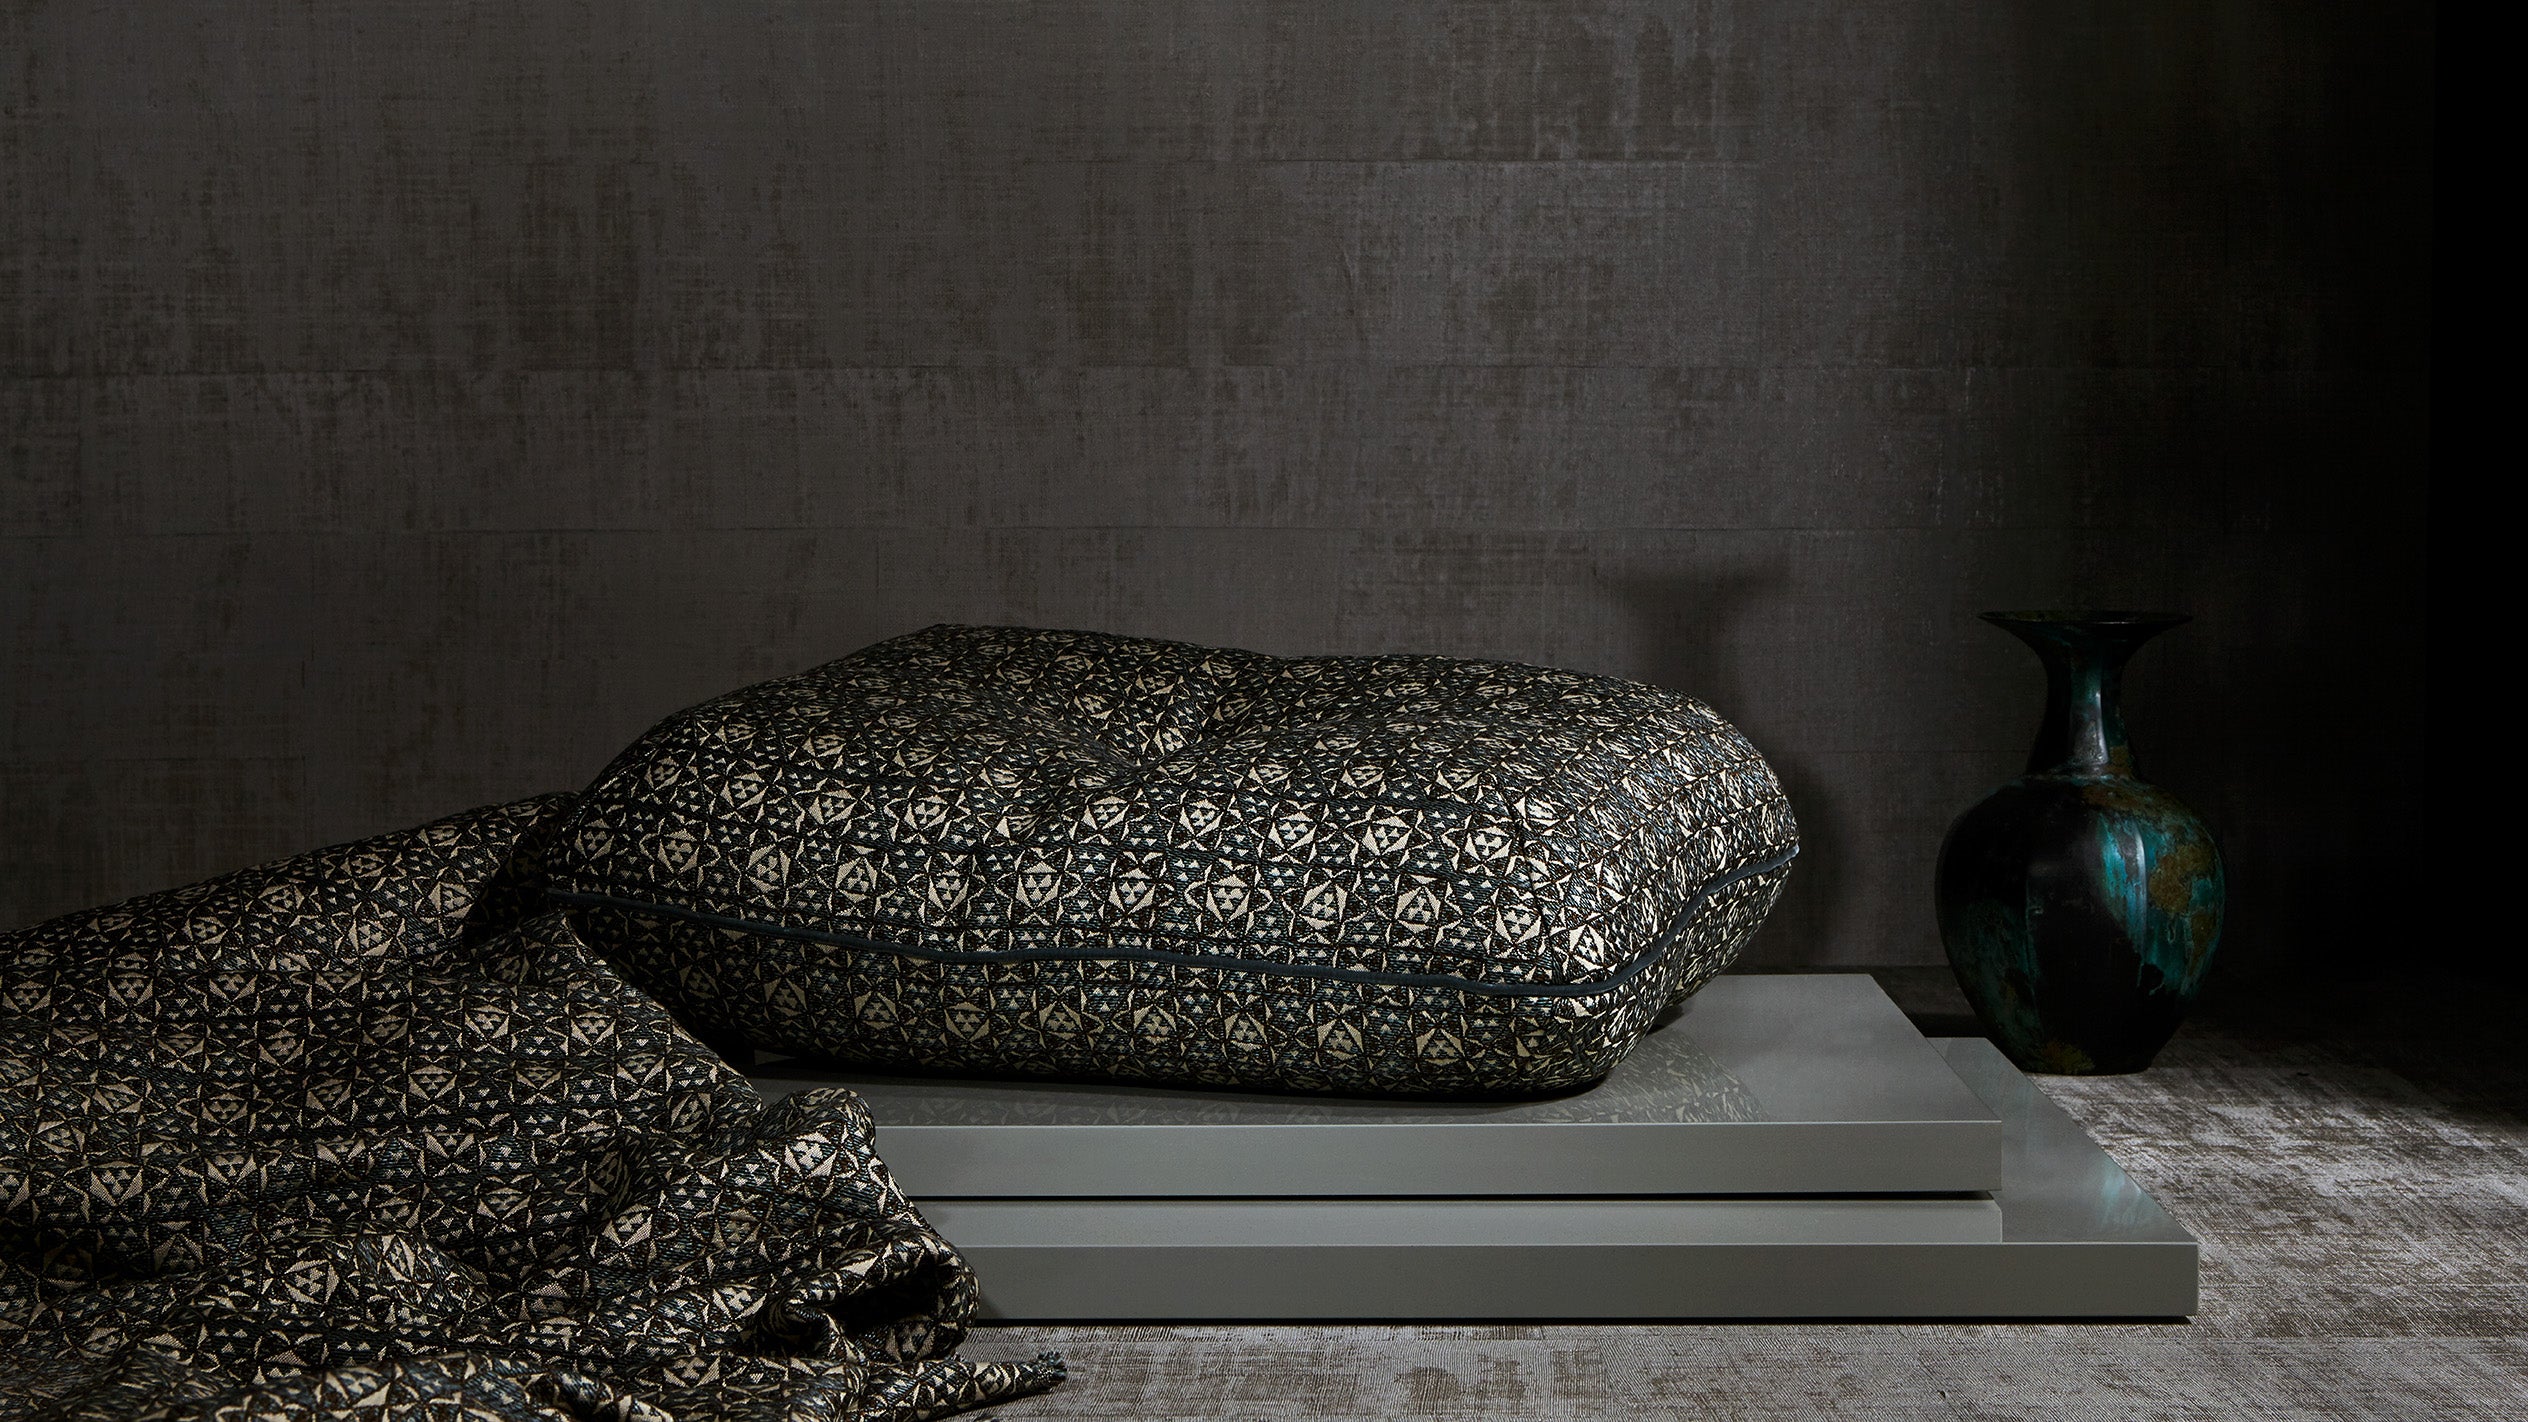 An upholstered cushion and draped fabric.